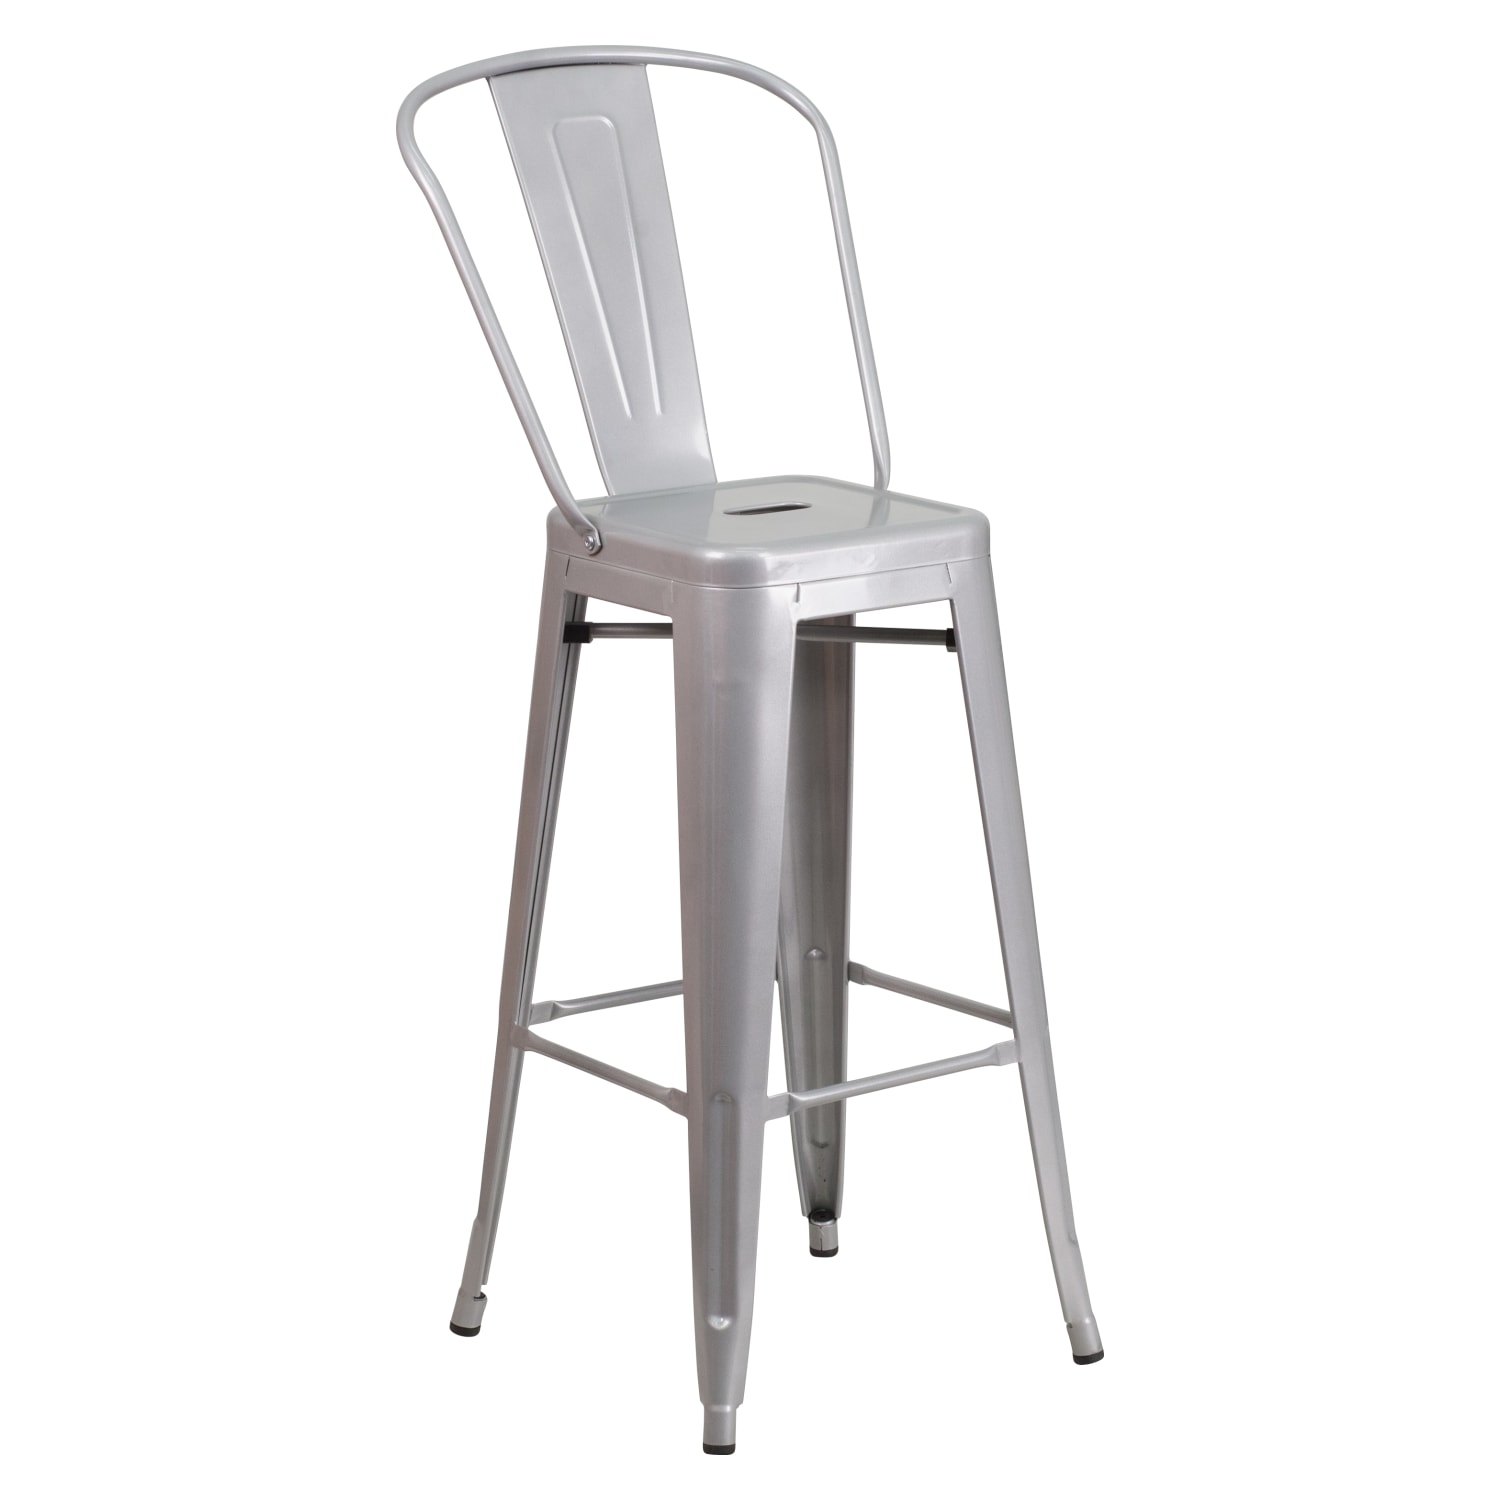 30” High Silver Metal Indoor-Outdoor Barstool with Removable Back